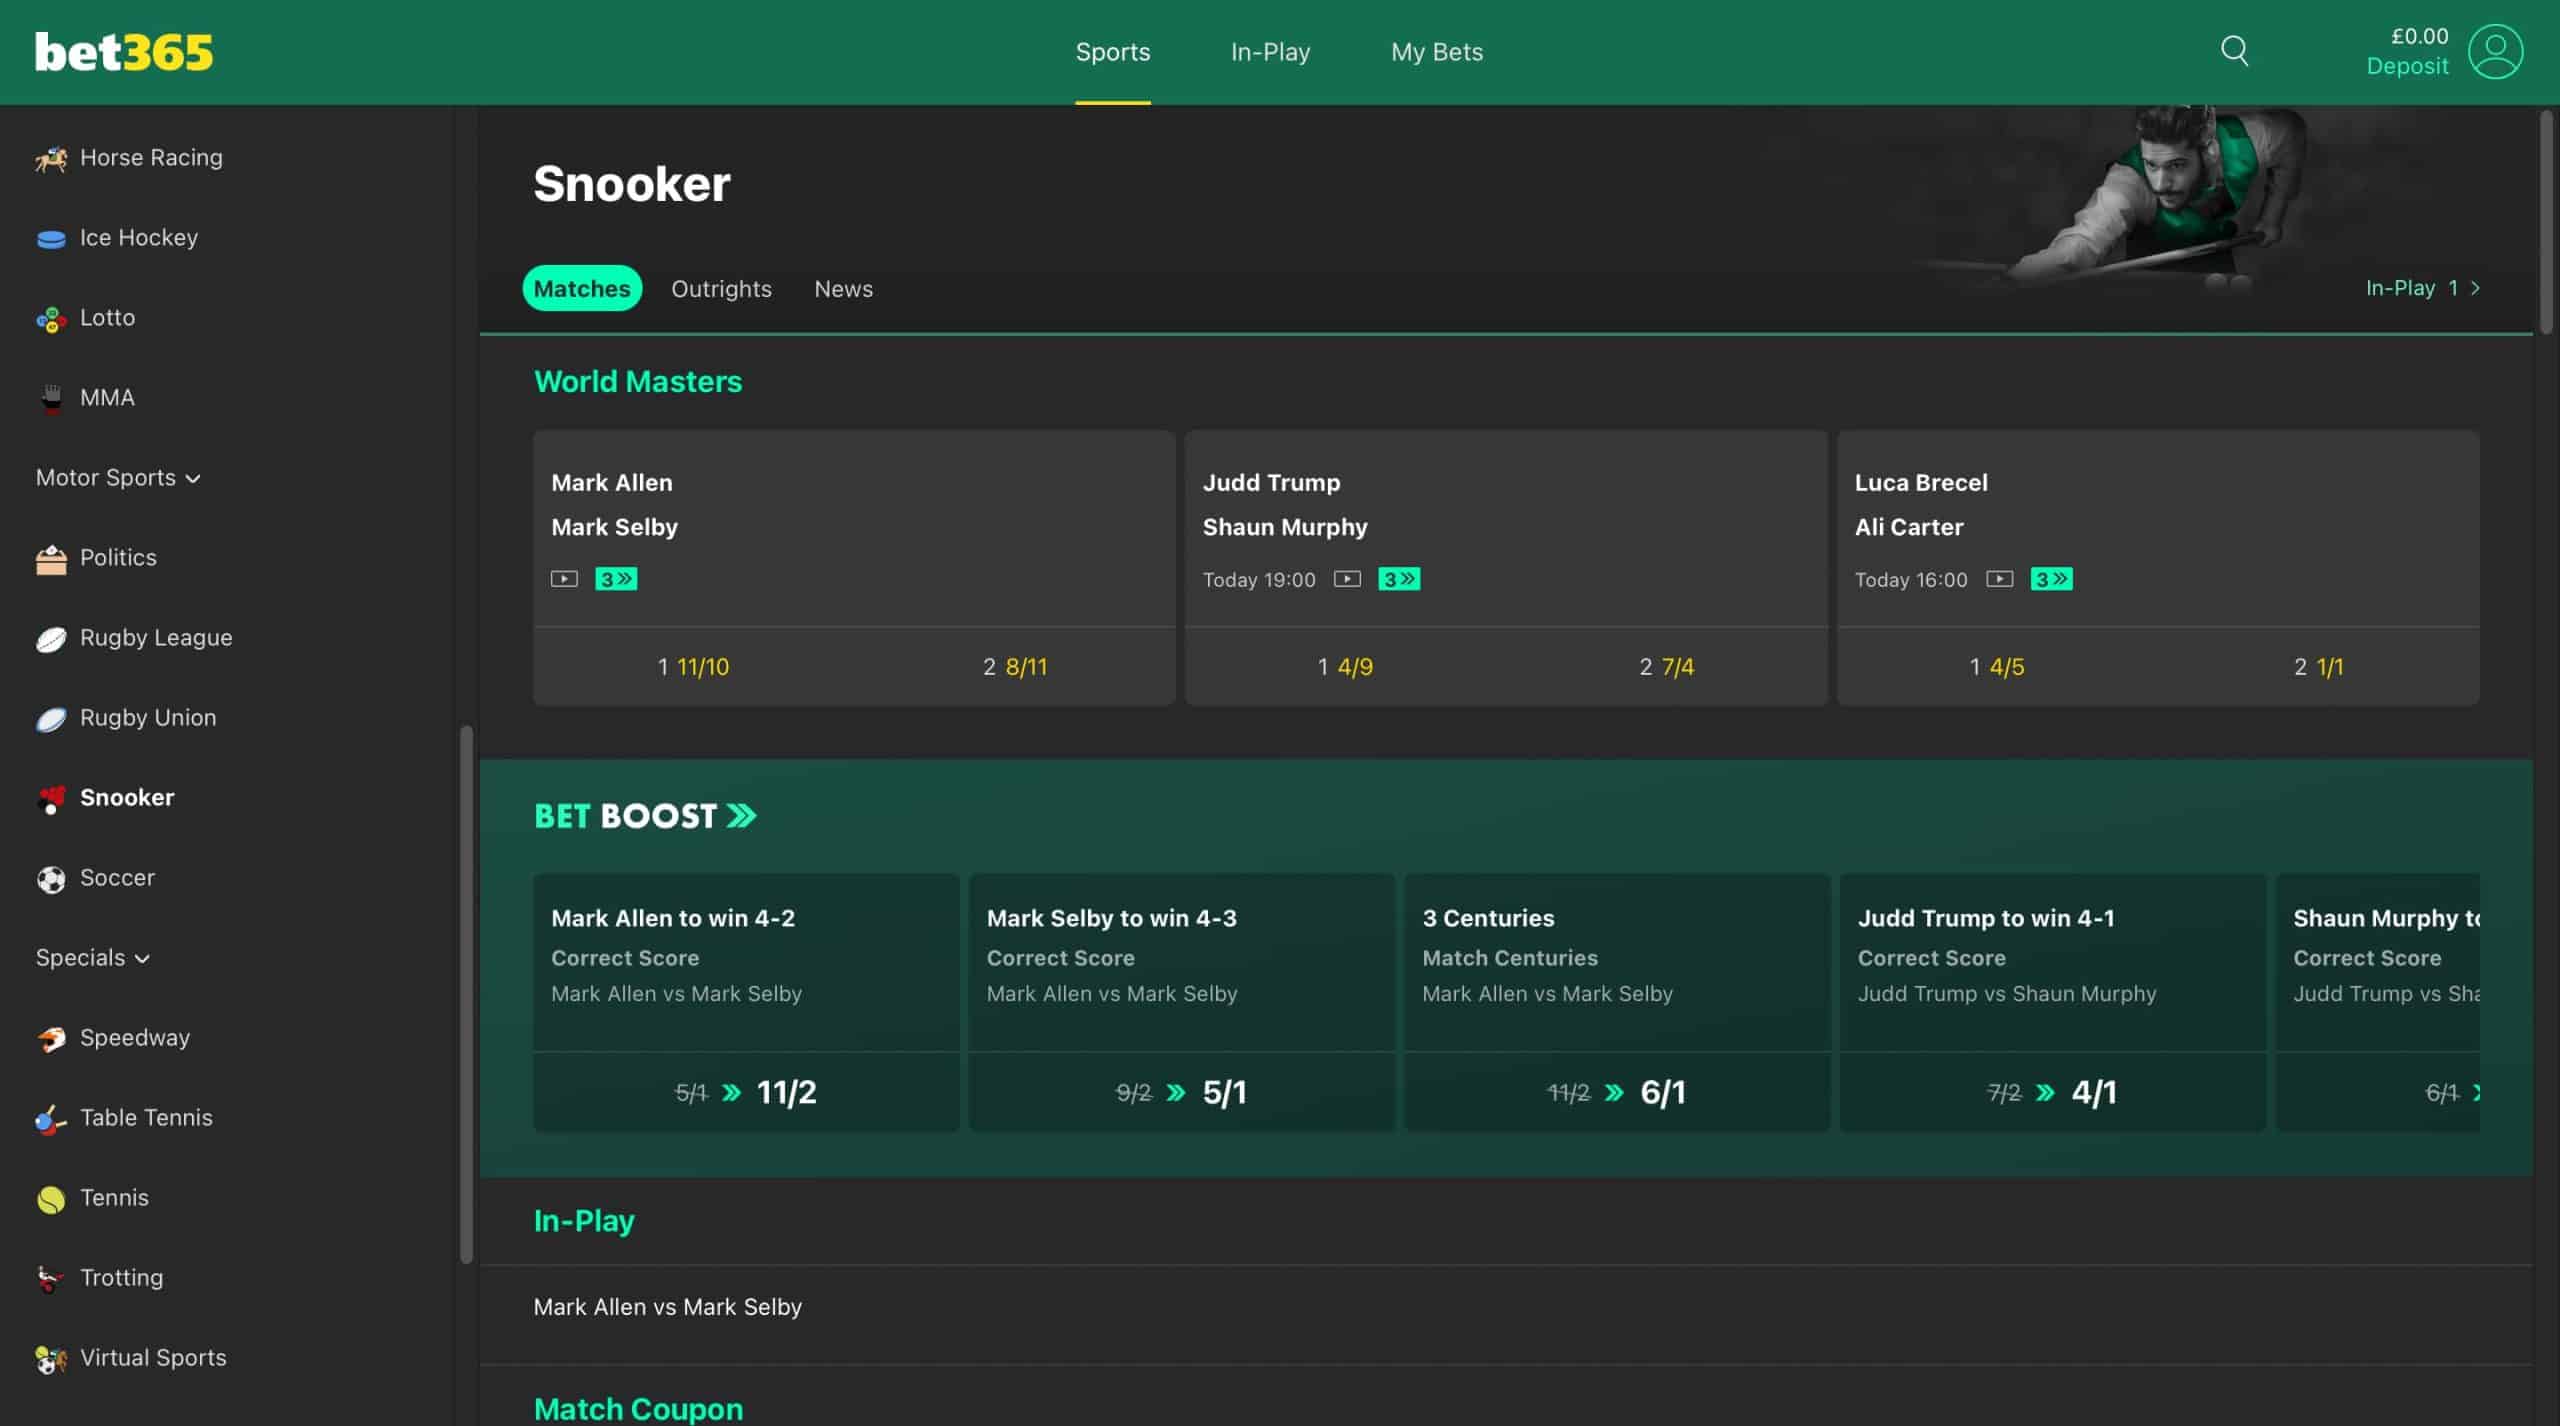 bet365 snooker page